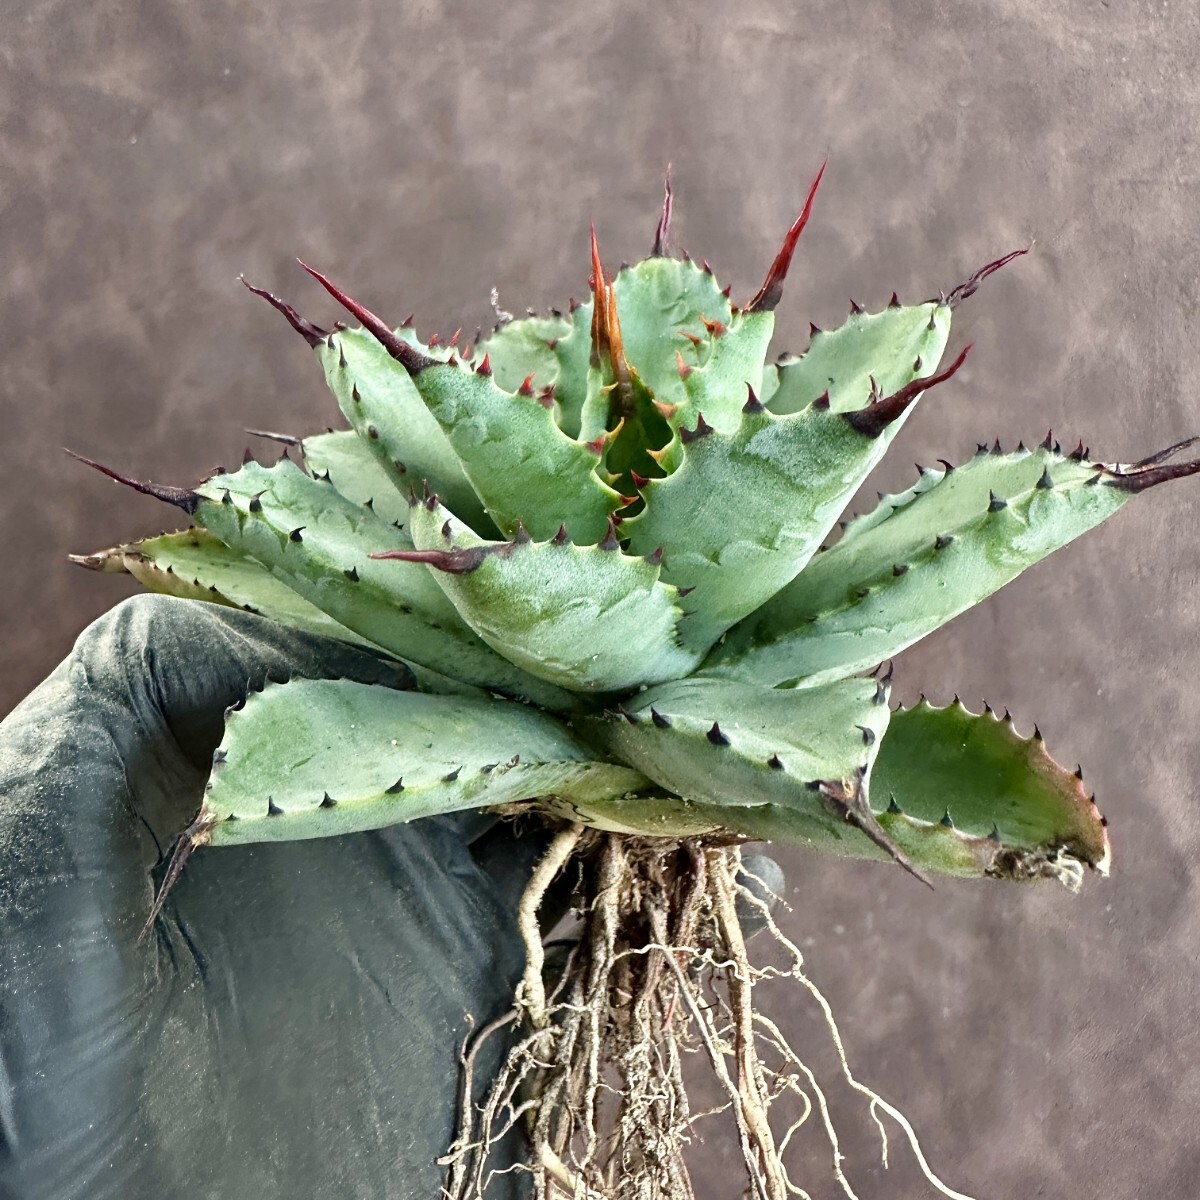 [Lj_plants]W183 succulent plant agave a little over bending ... a little over . madness . finest quality stock super rare stock carefuly selected finest quality stock 